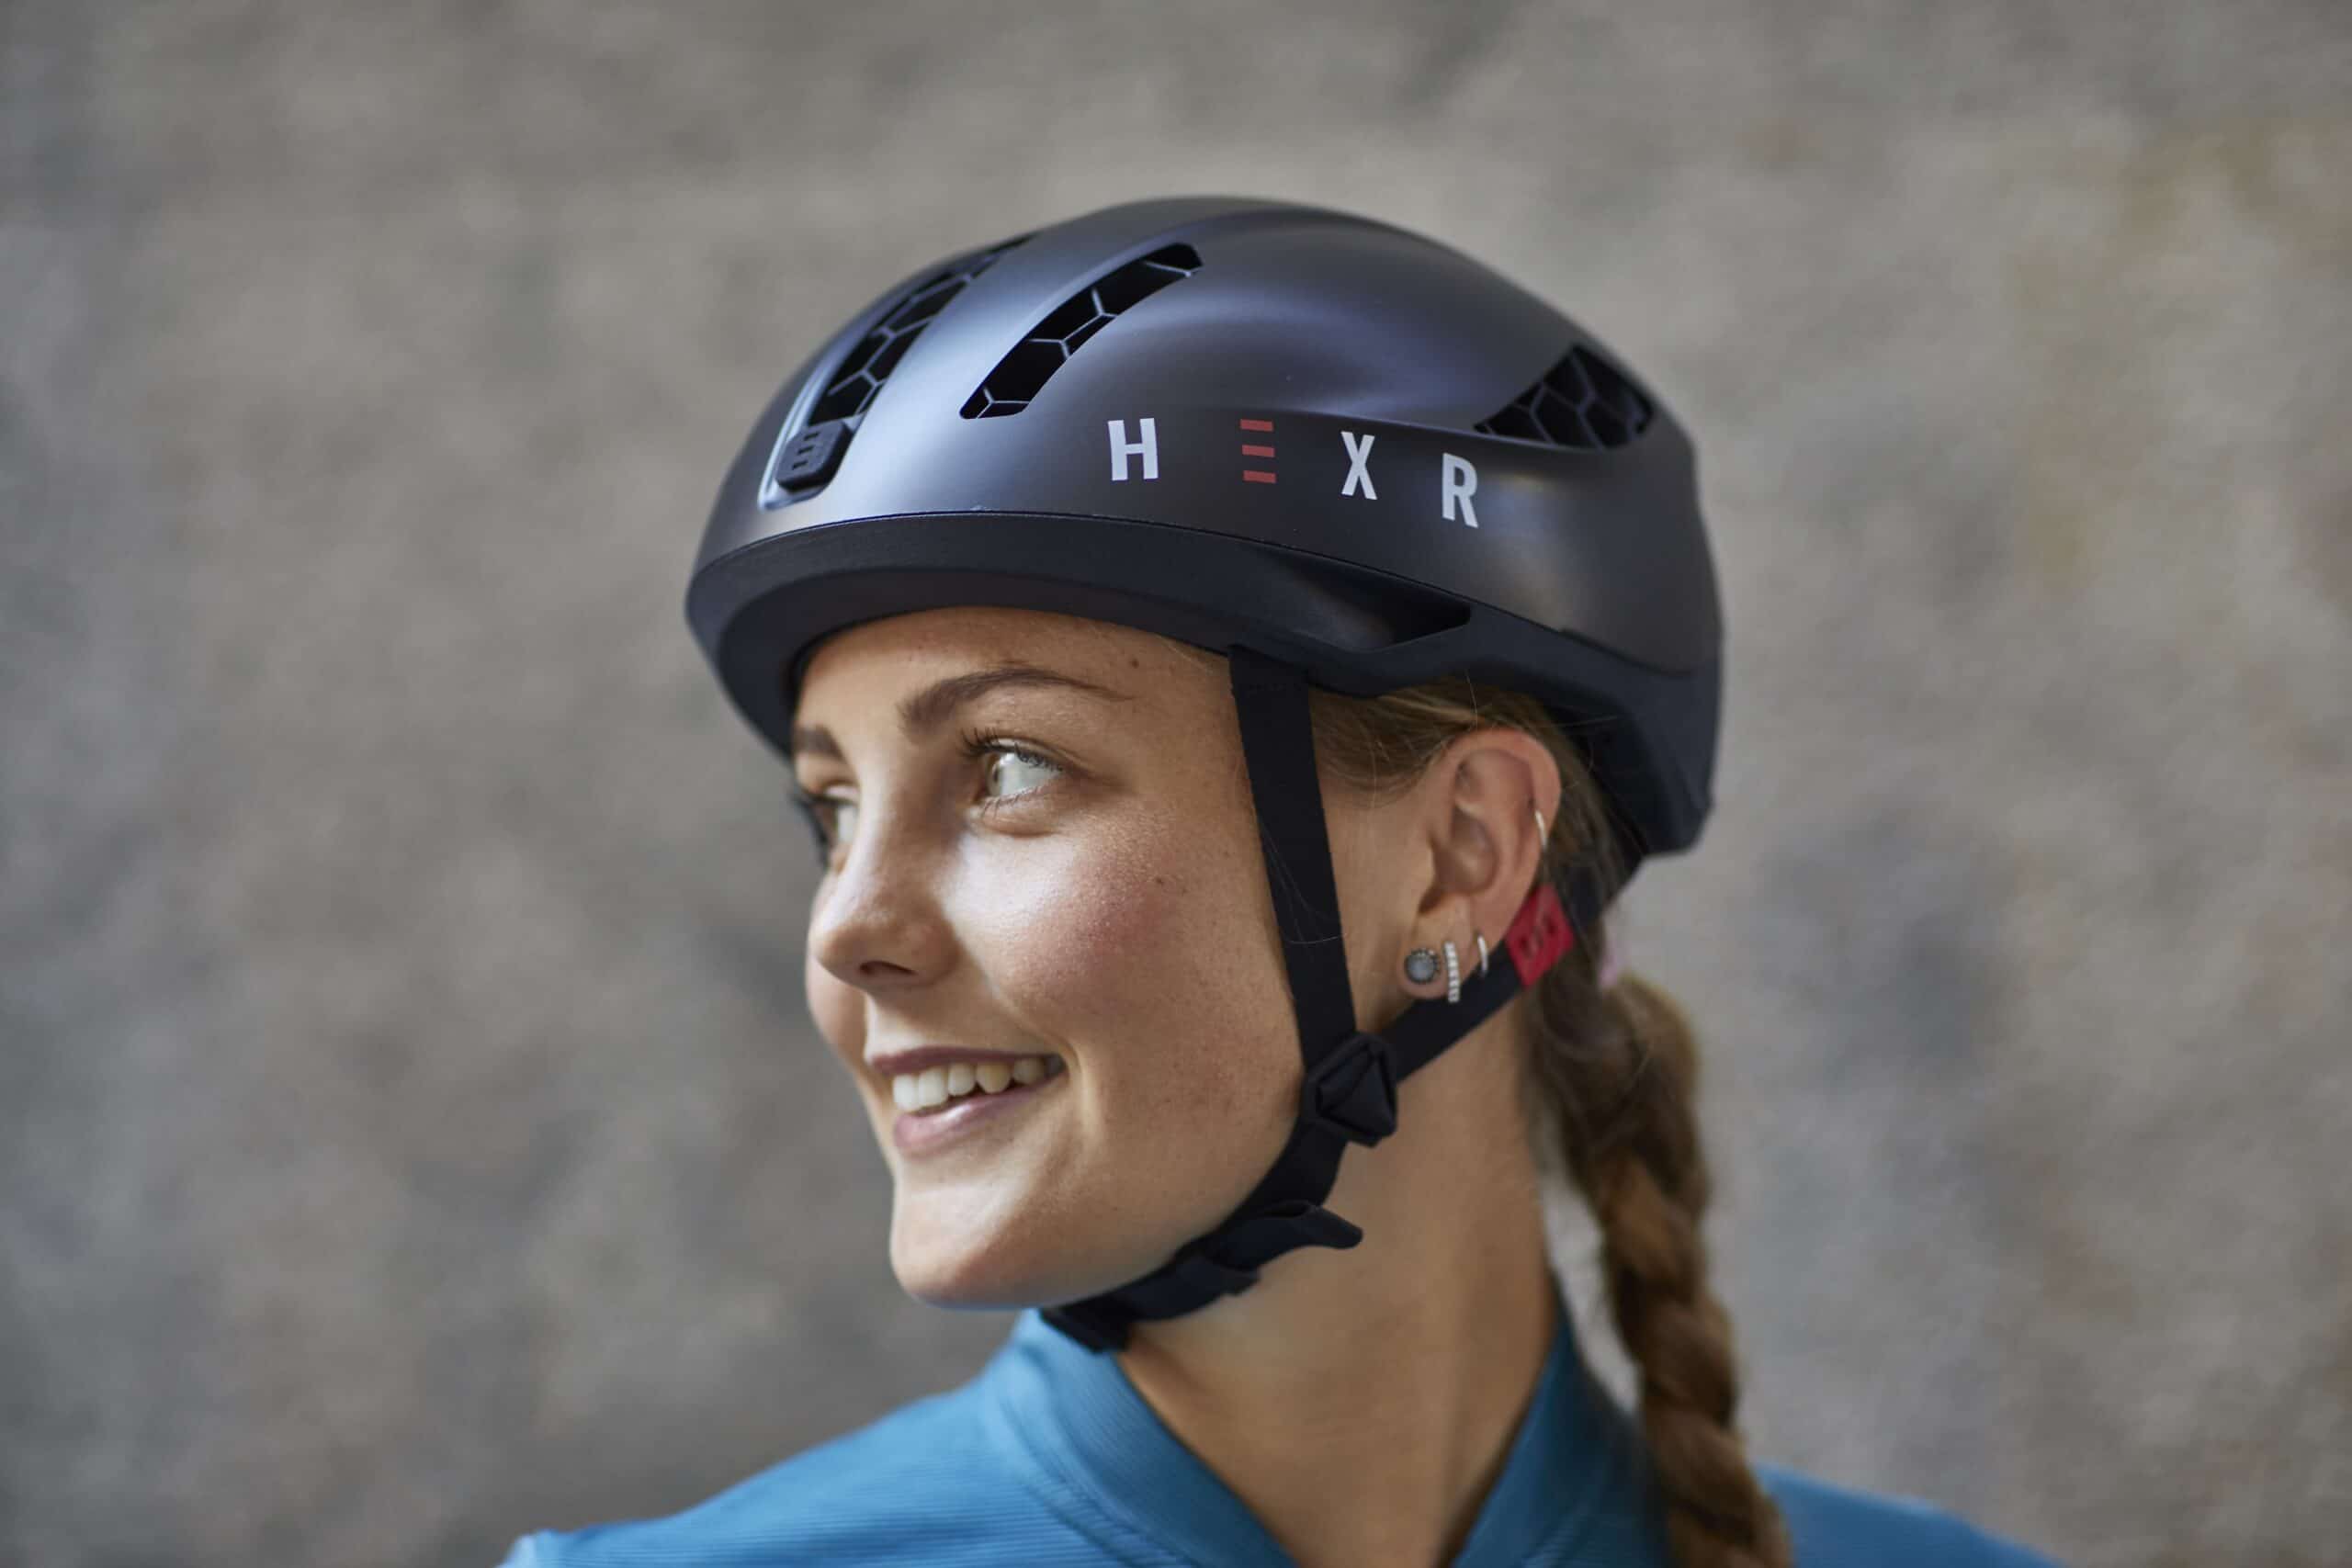 Get Fitted For A Bespoke Cycling Helmet From The Comfort Of Your Own Home With HEXR